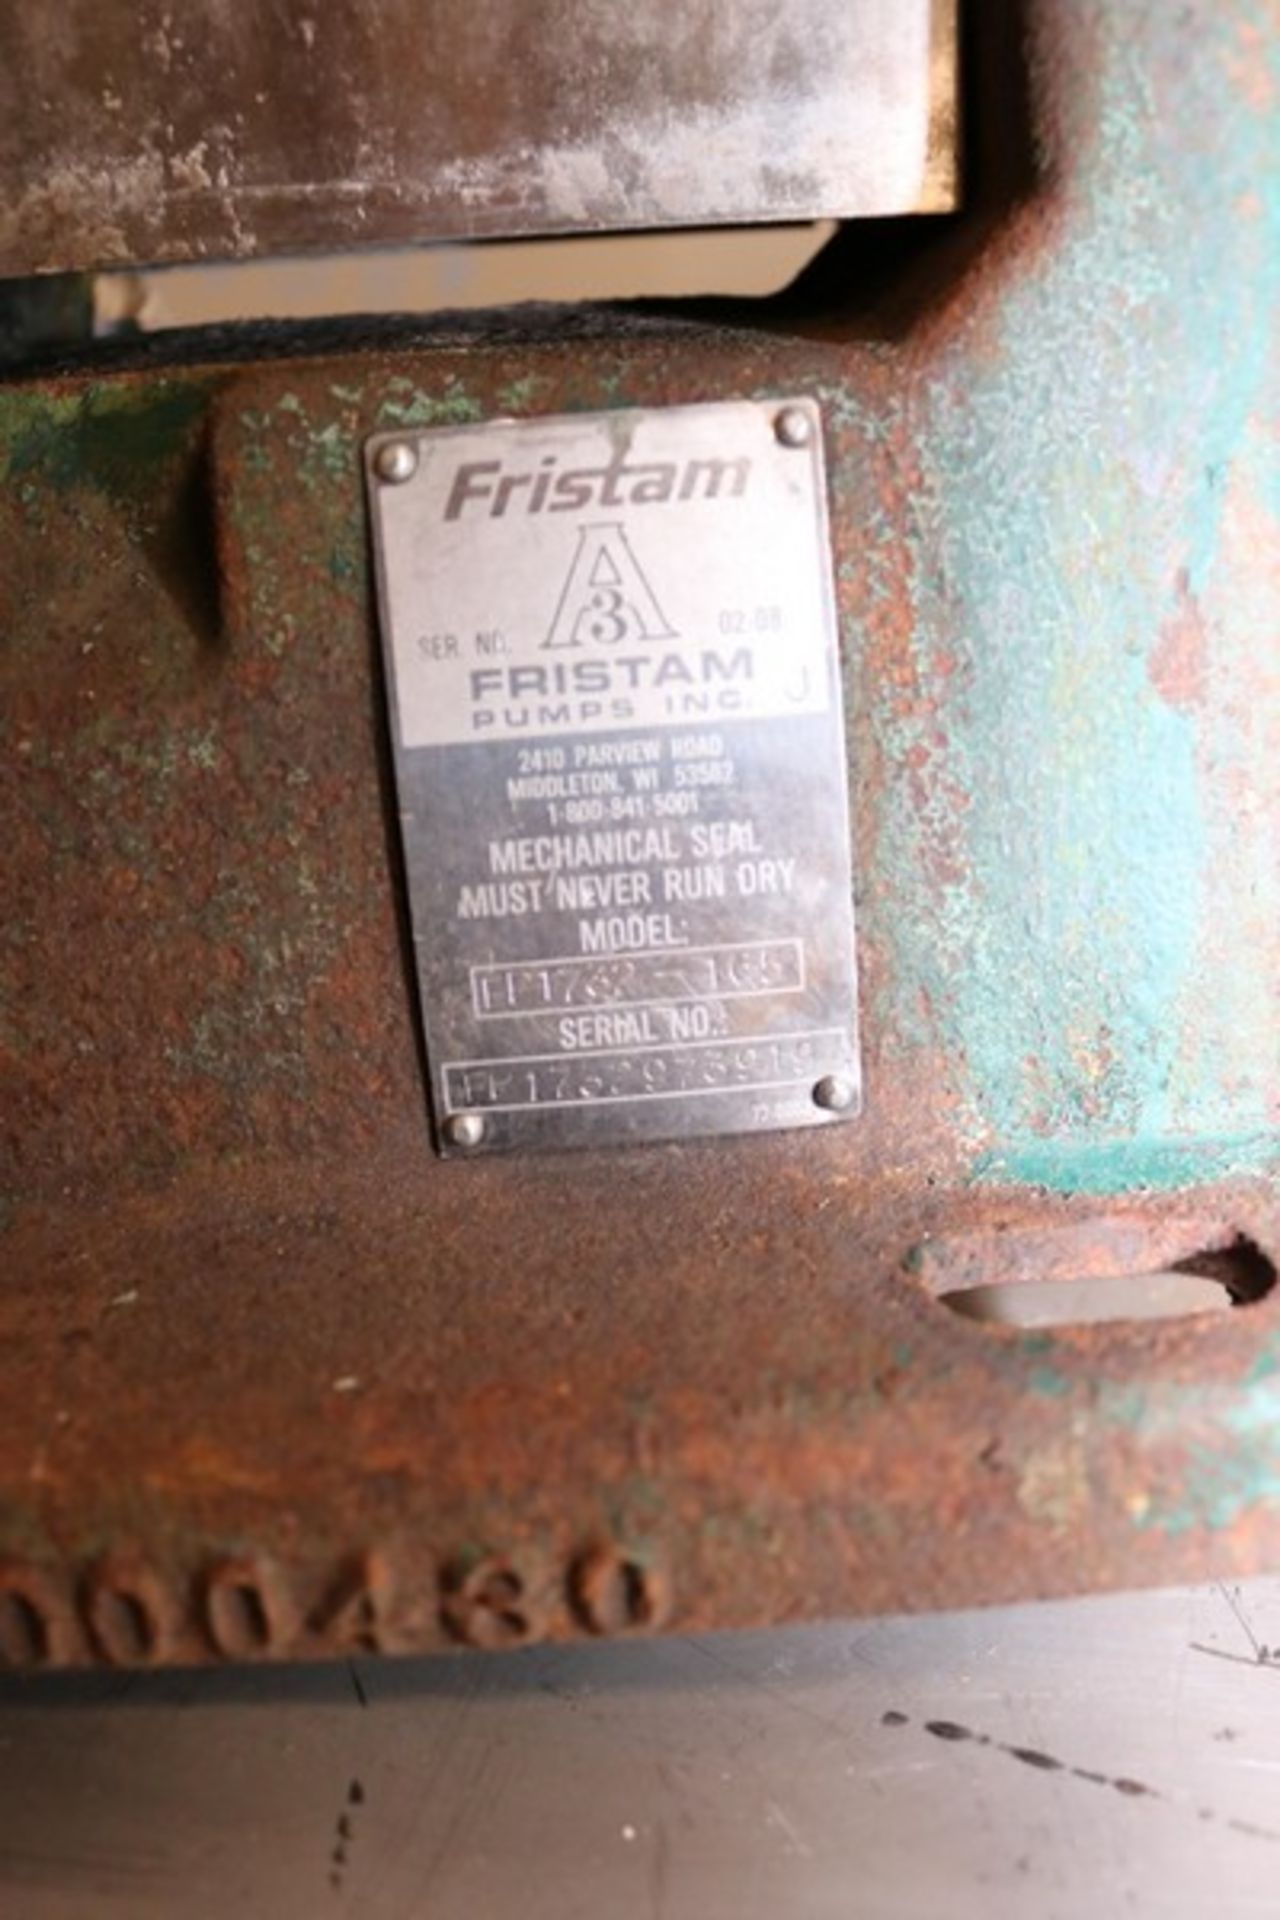 Fristam Aprox. 10 hp Centrifugal Pump, M/N FP1732-165, S/N FP175229739919, with Aprox. 2" x 3" Clamp - Image 5 of 6